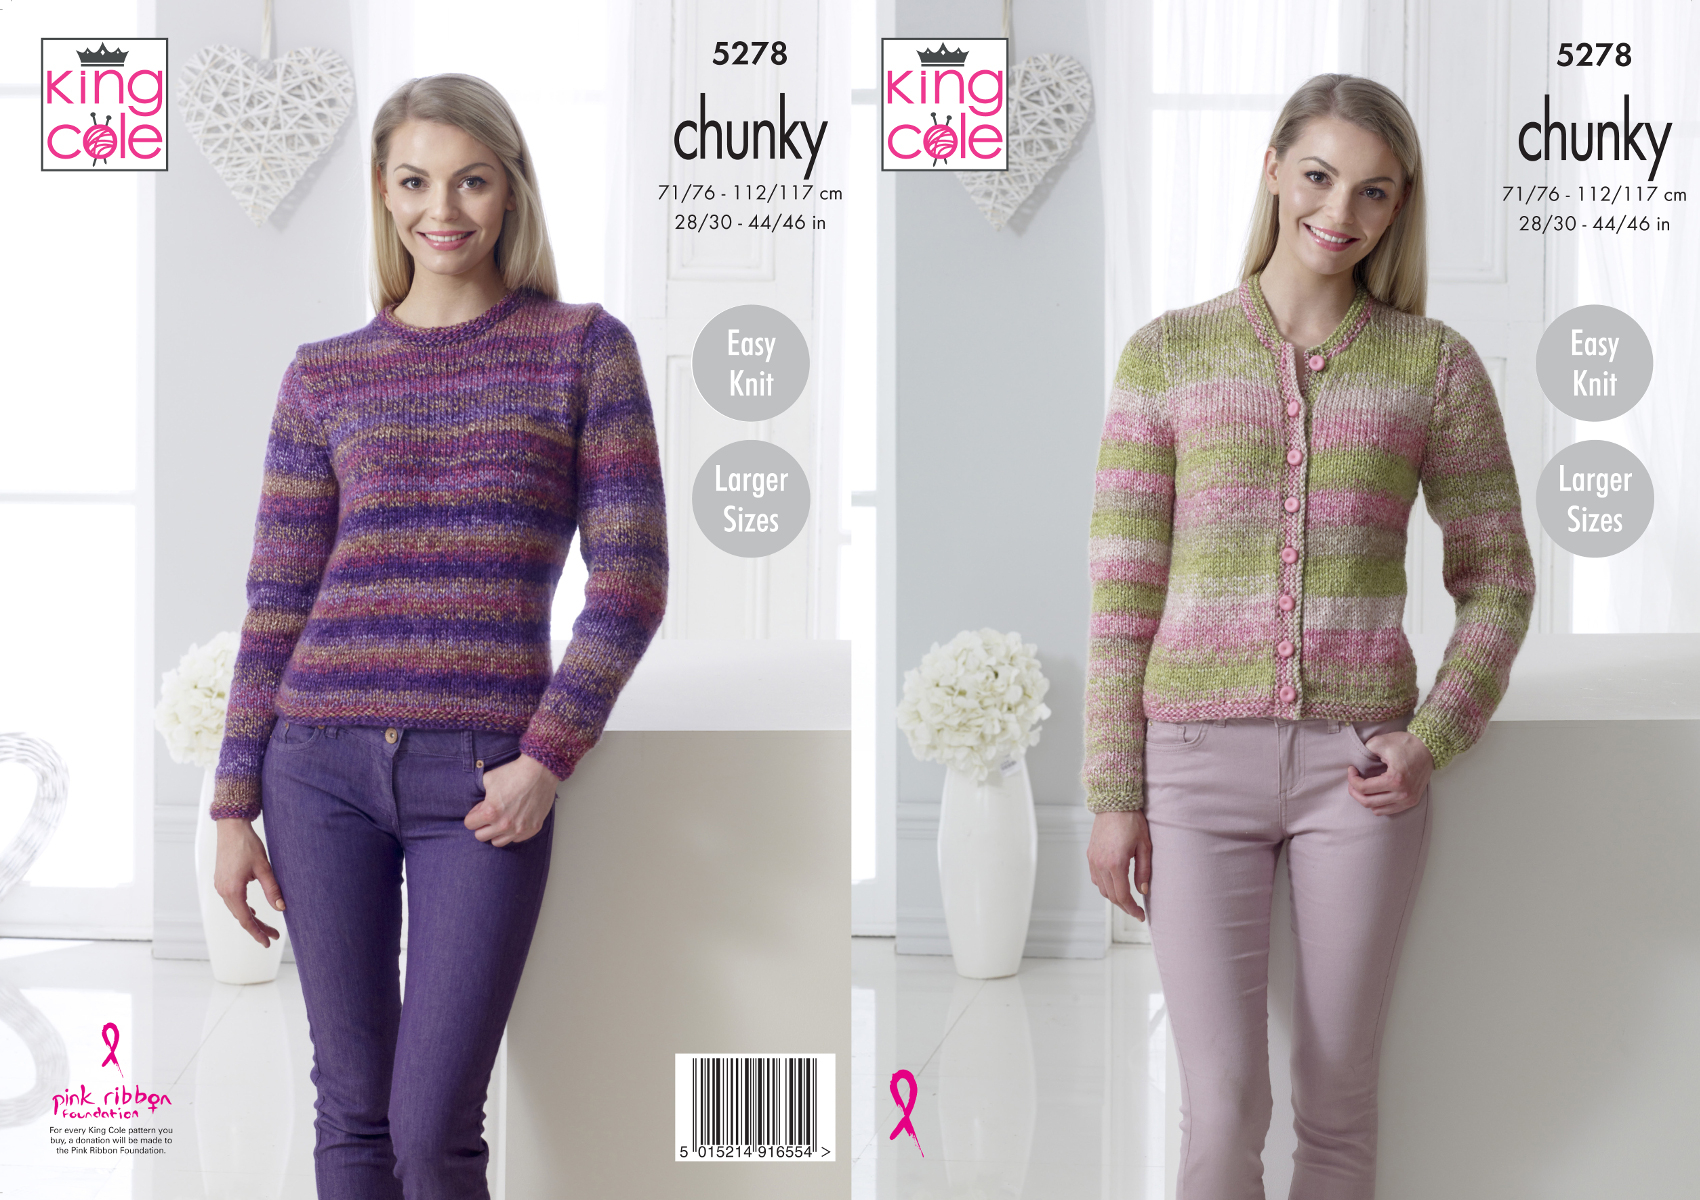 Easy Jumper Knitting Pattern Details About Easy Knit Womens Jumper Cardigan Ladies Chunky Knitting Pattern King Cole 5278